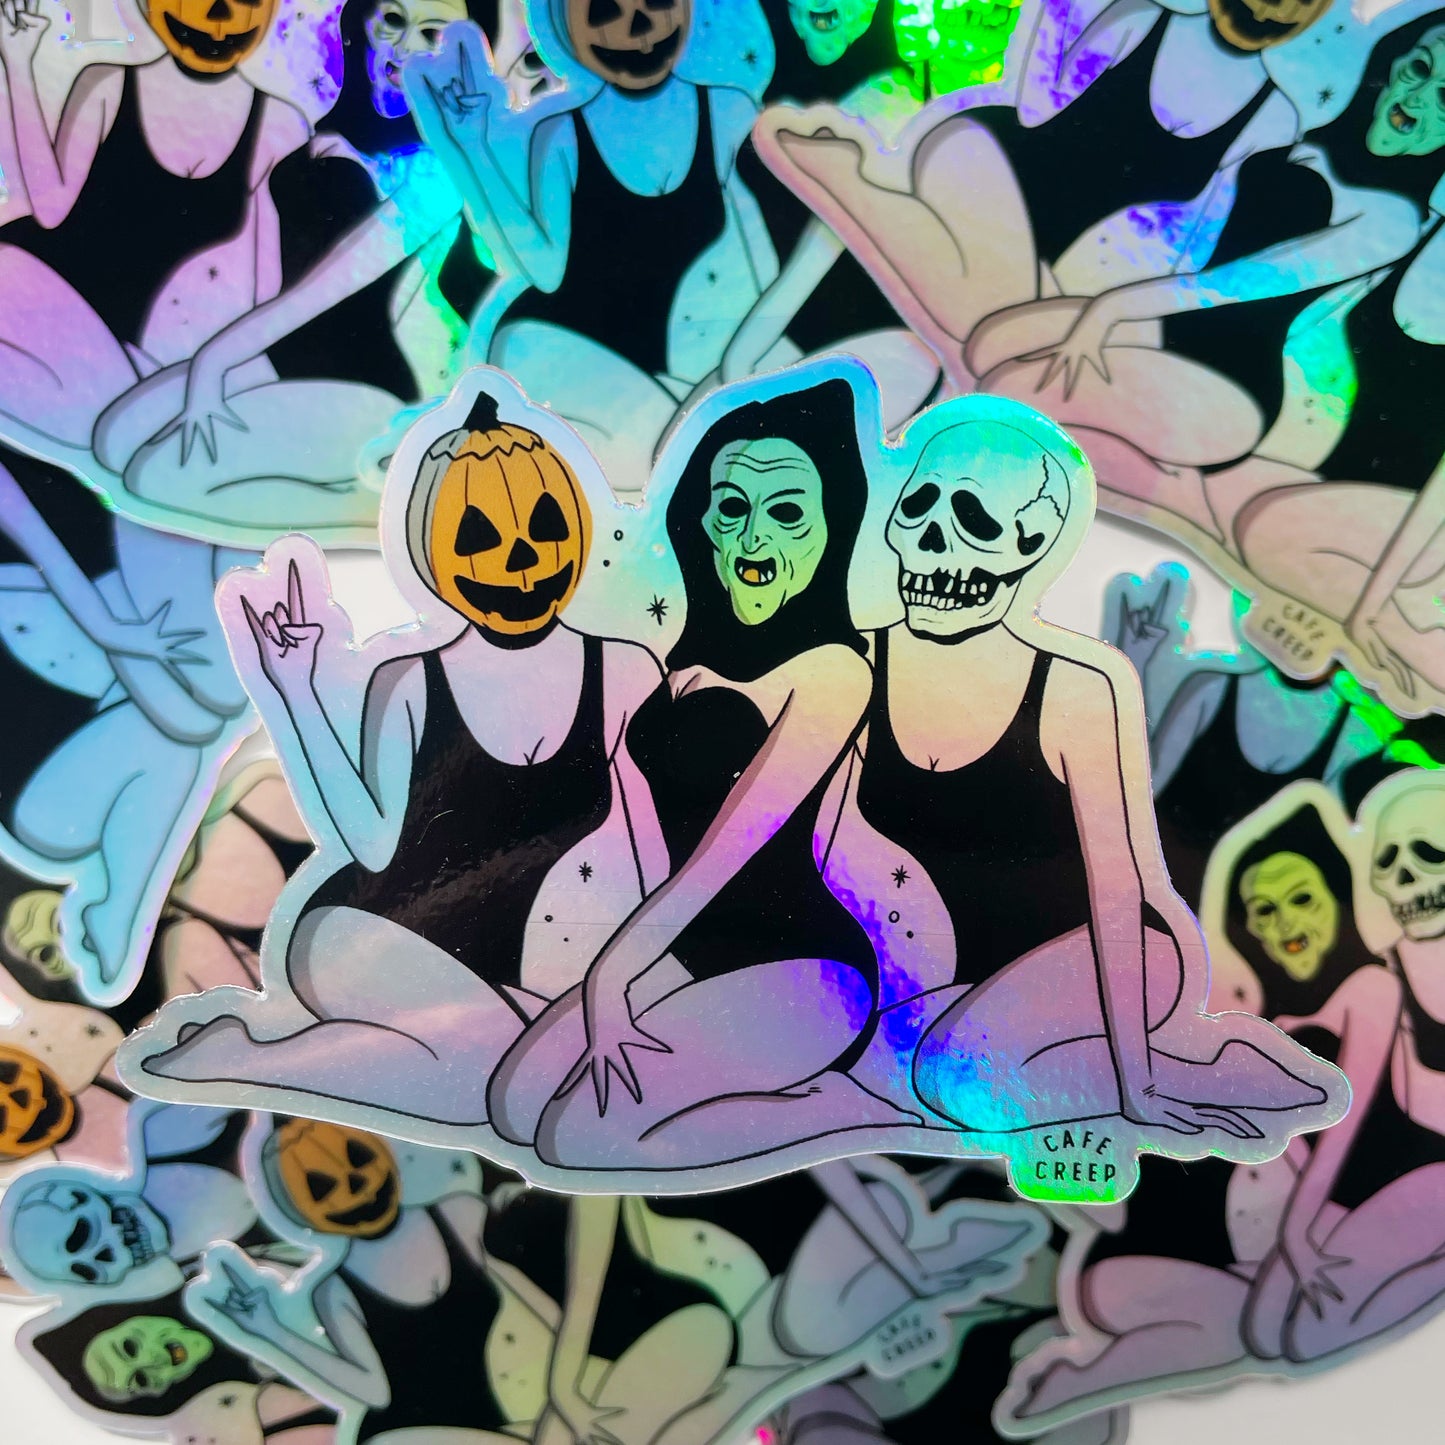 SEASON OF THE WITCH (holographic sticker)